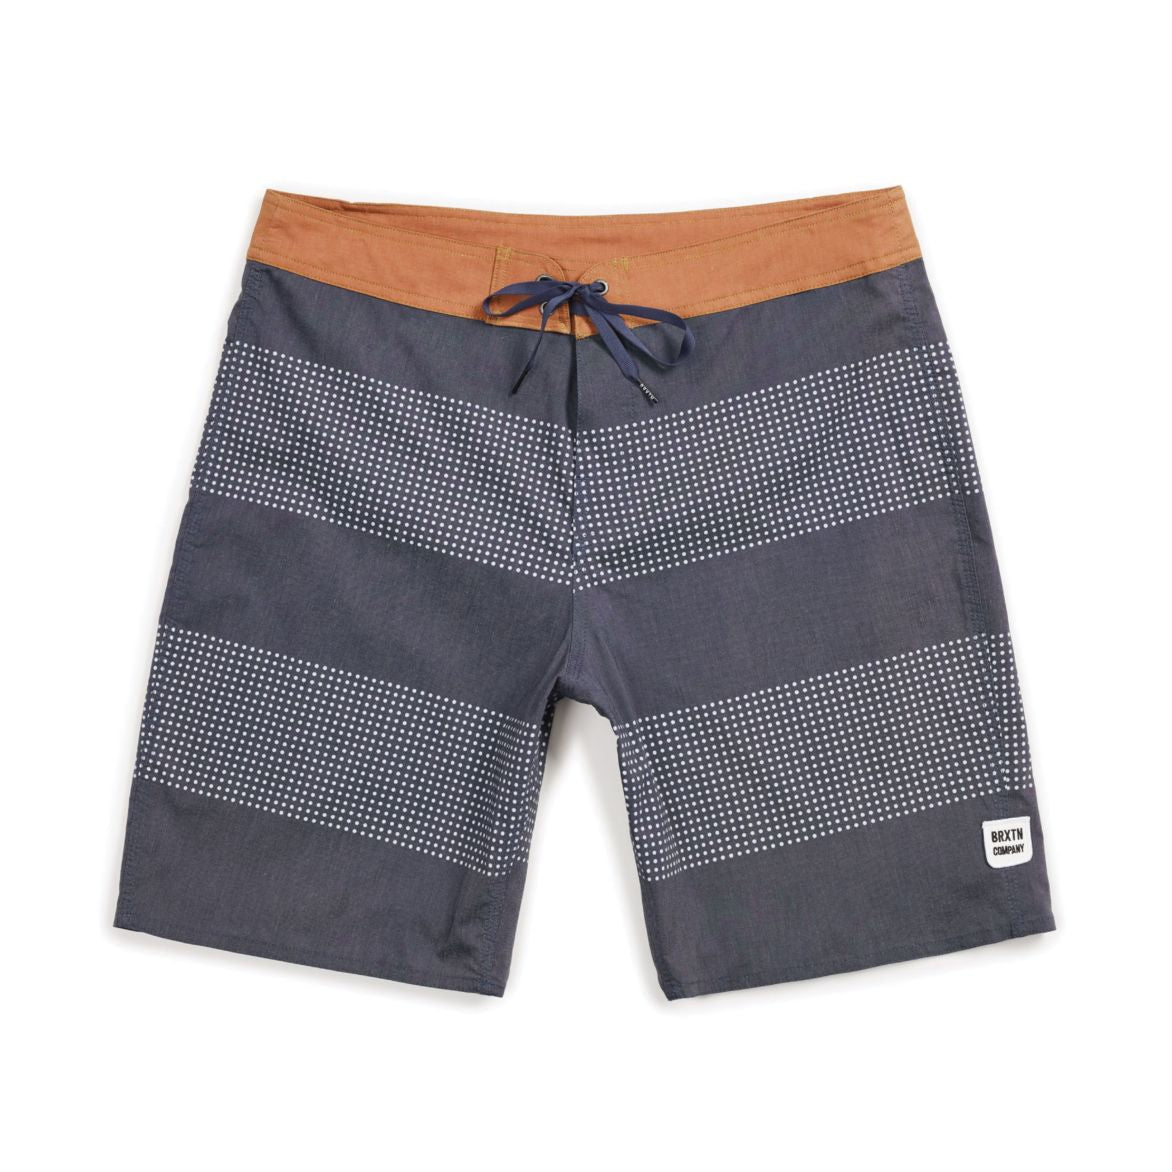 get $5 off boardshorts at 88 Gear